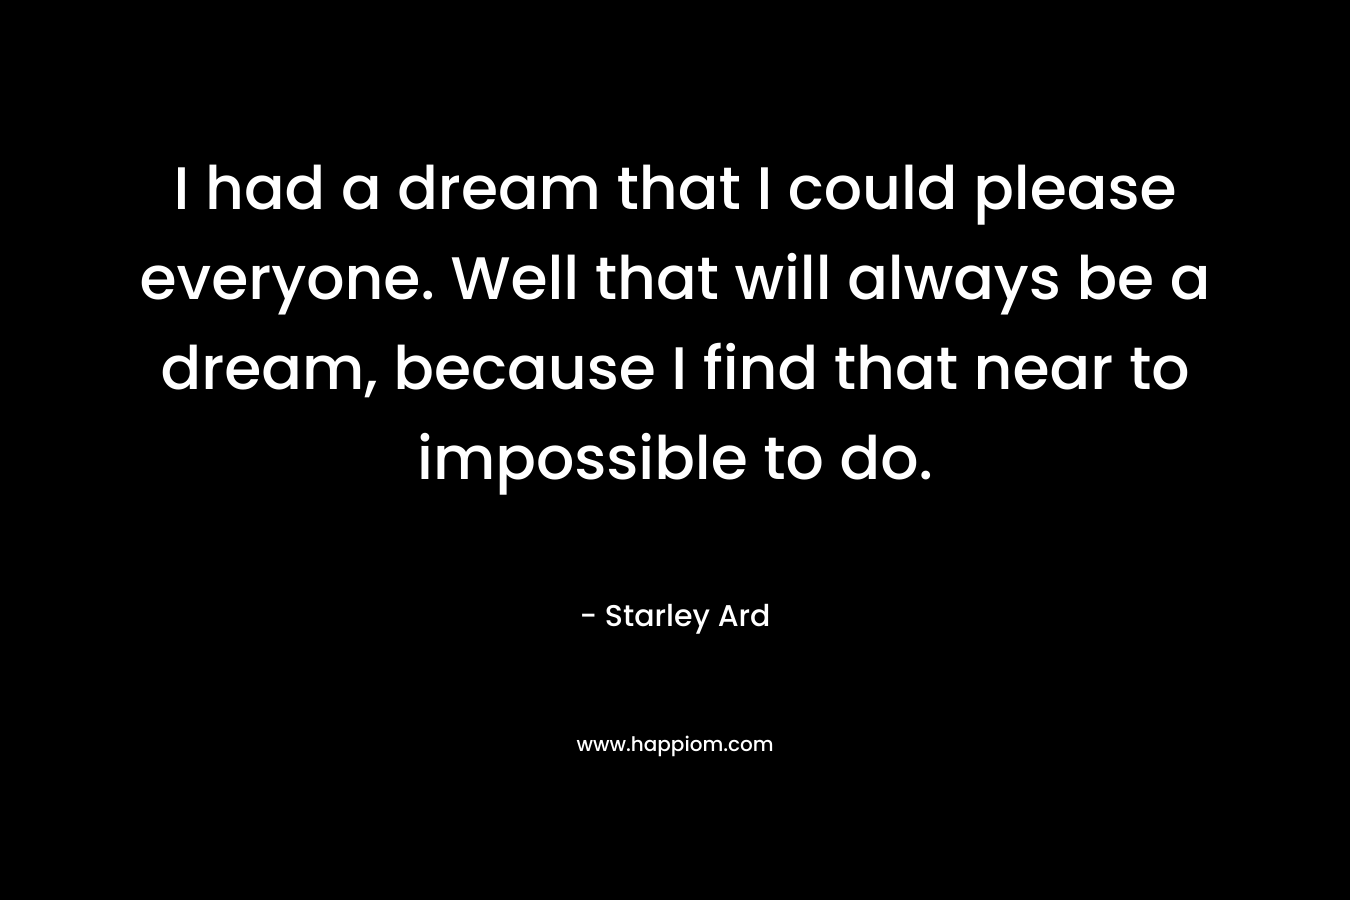 I had a dream that I could please everyone. Well that will always be a dream, because I find that near to impossible to do.